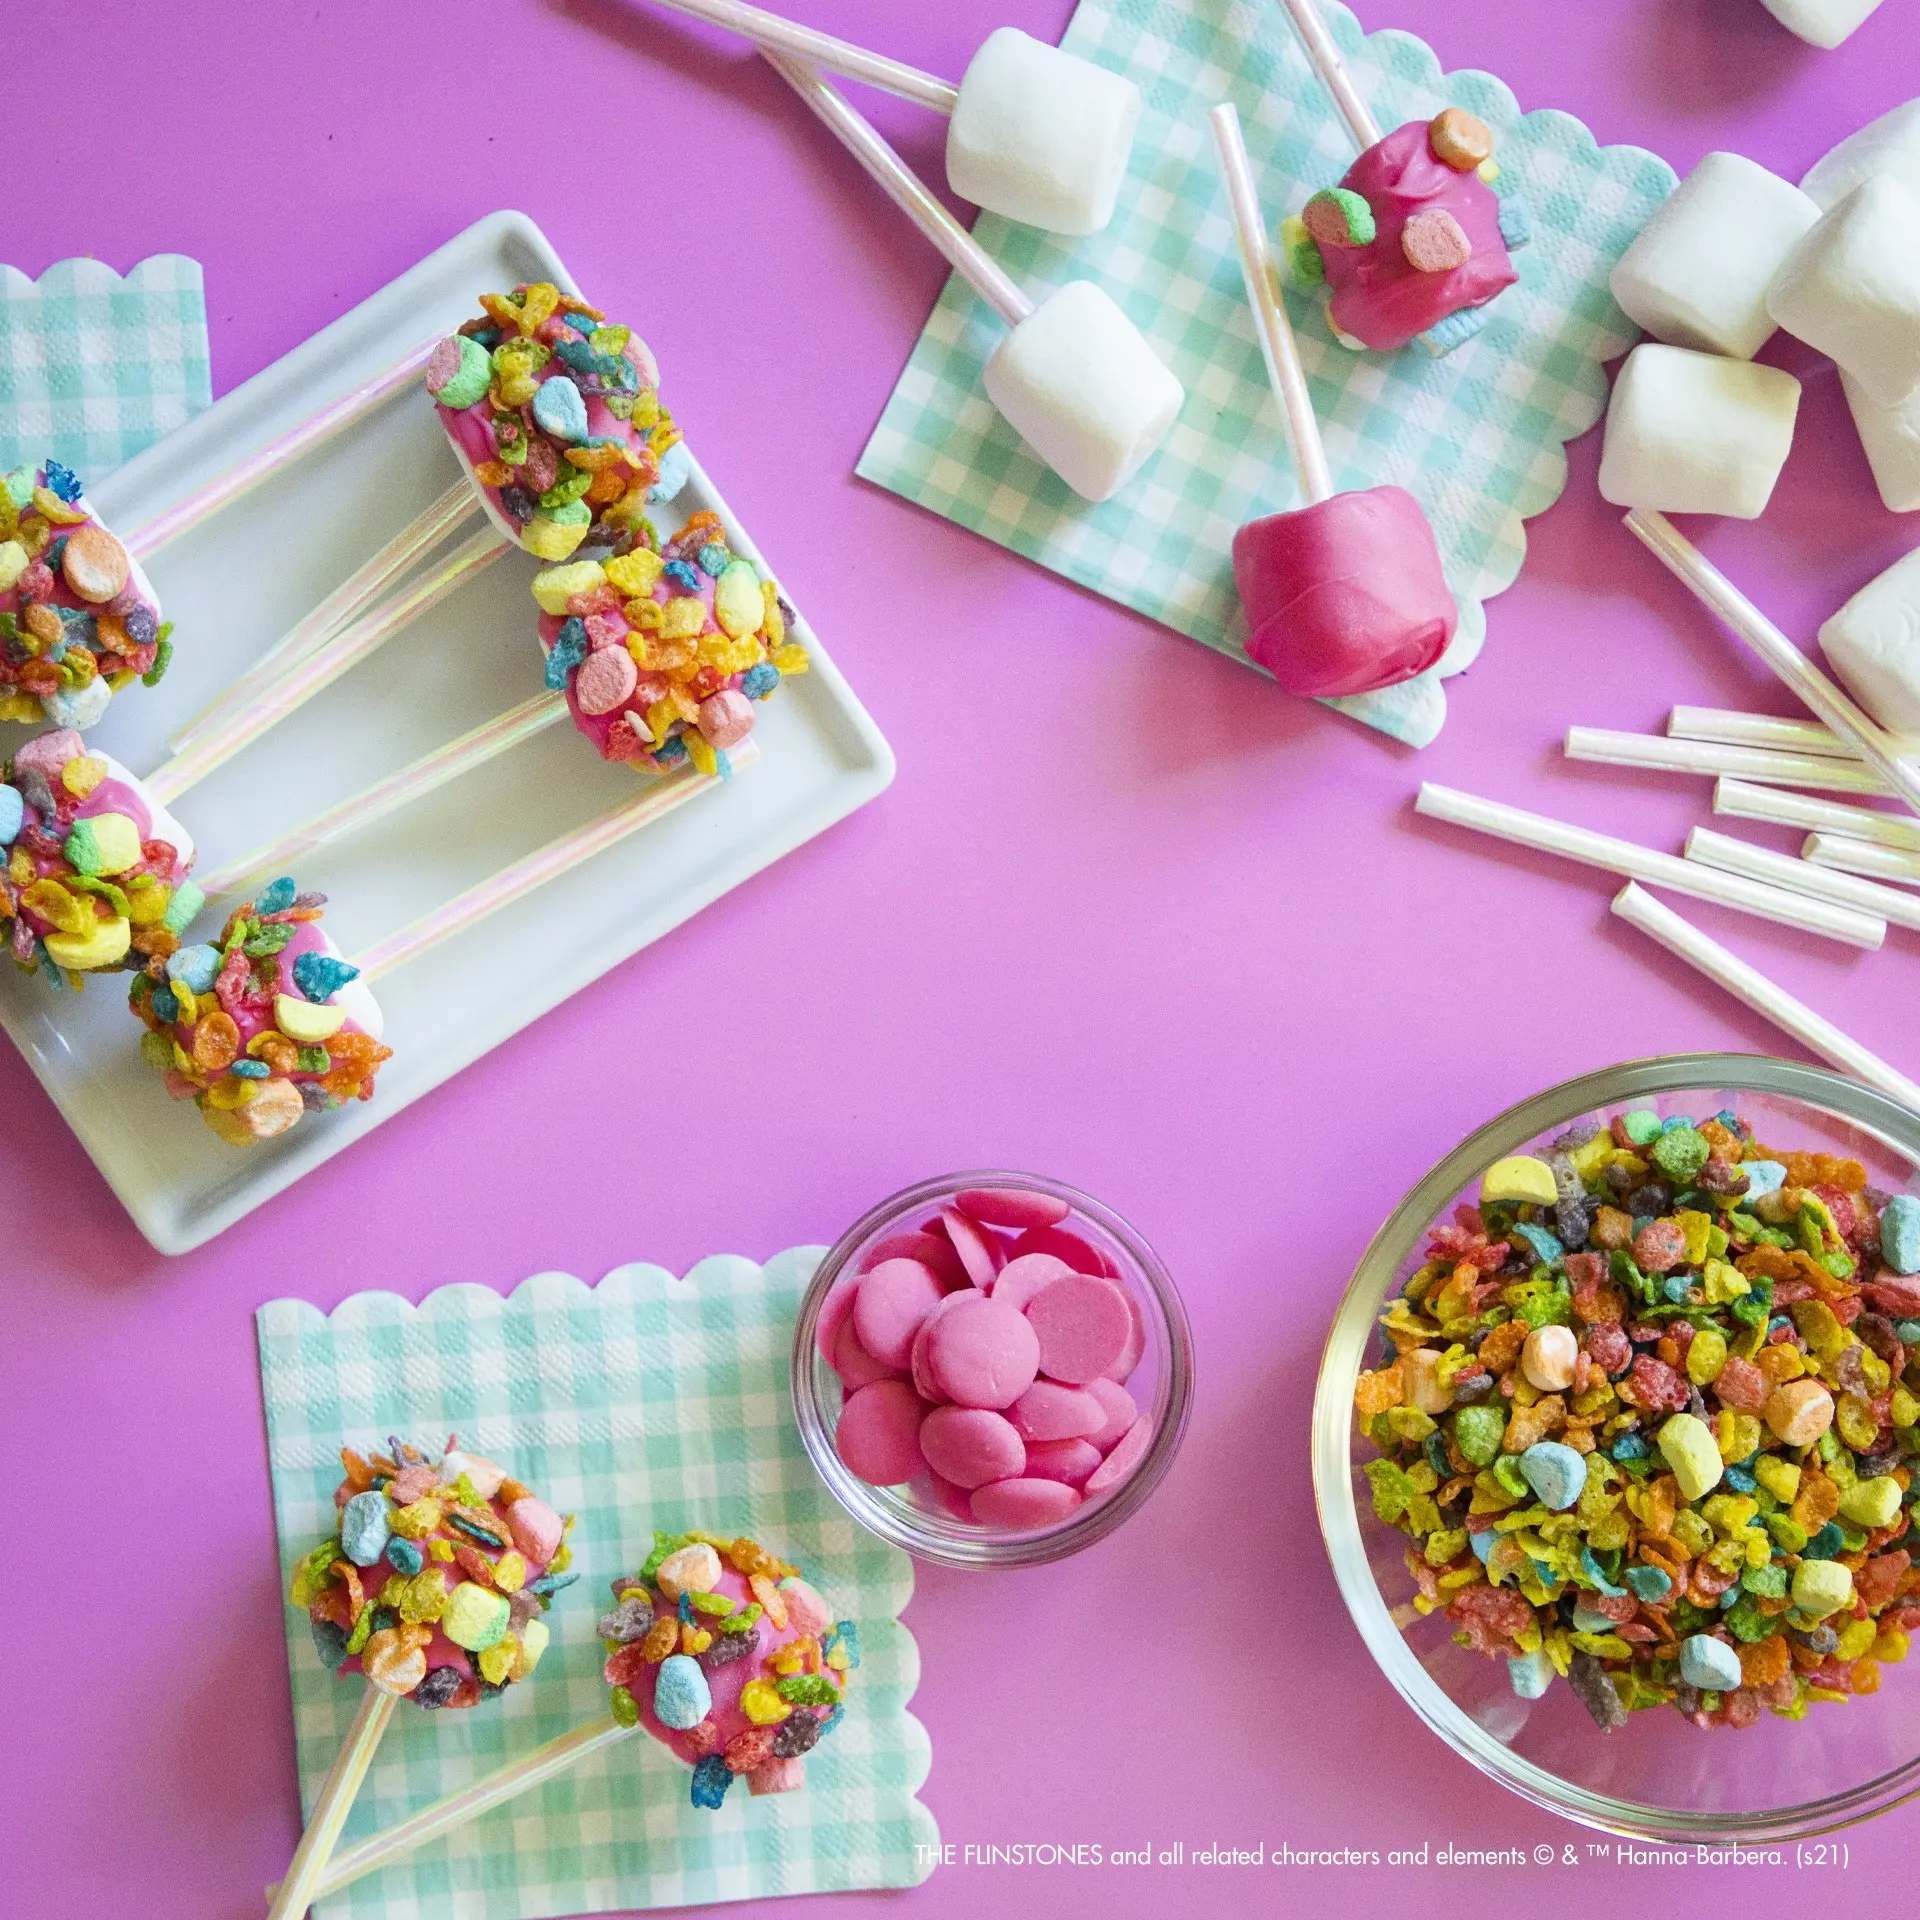 Marshmallow Fruity PEBBLES pops on napkins atop a pink table.